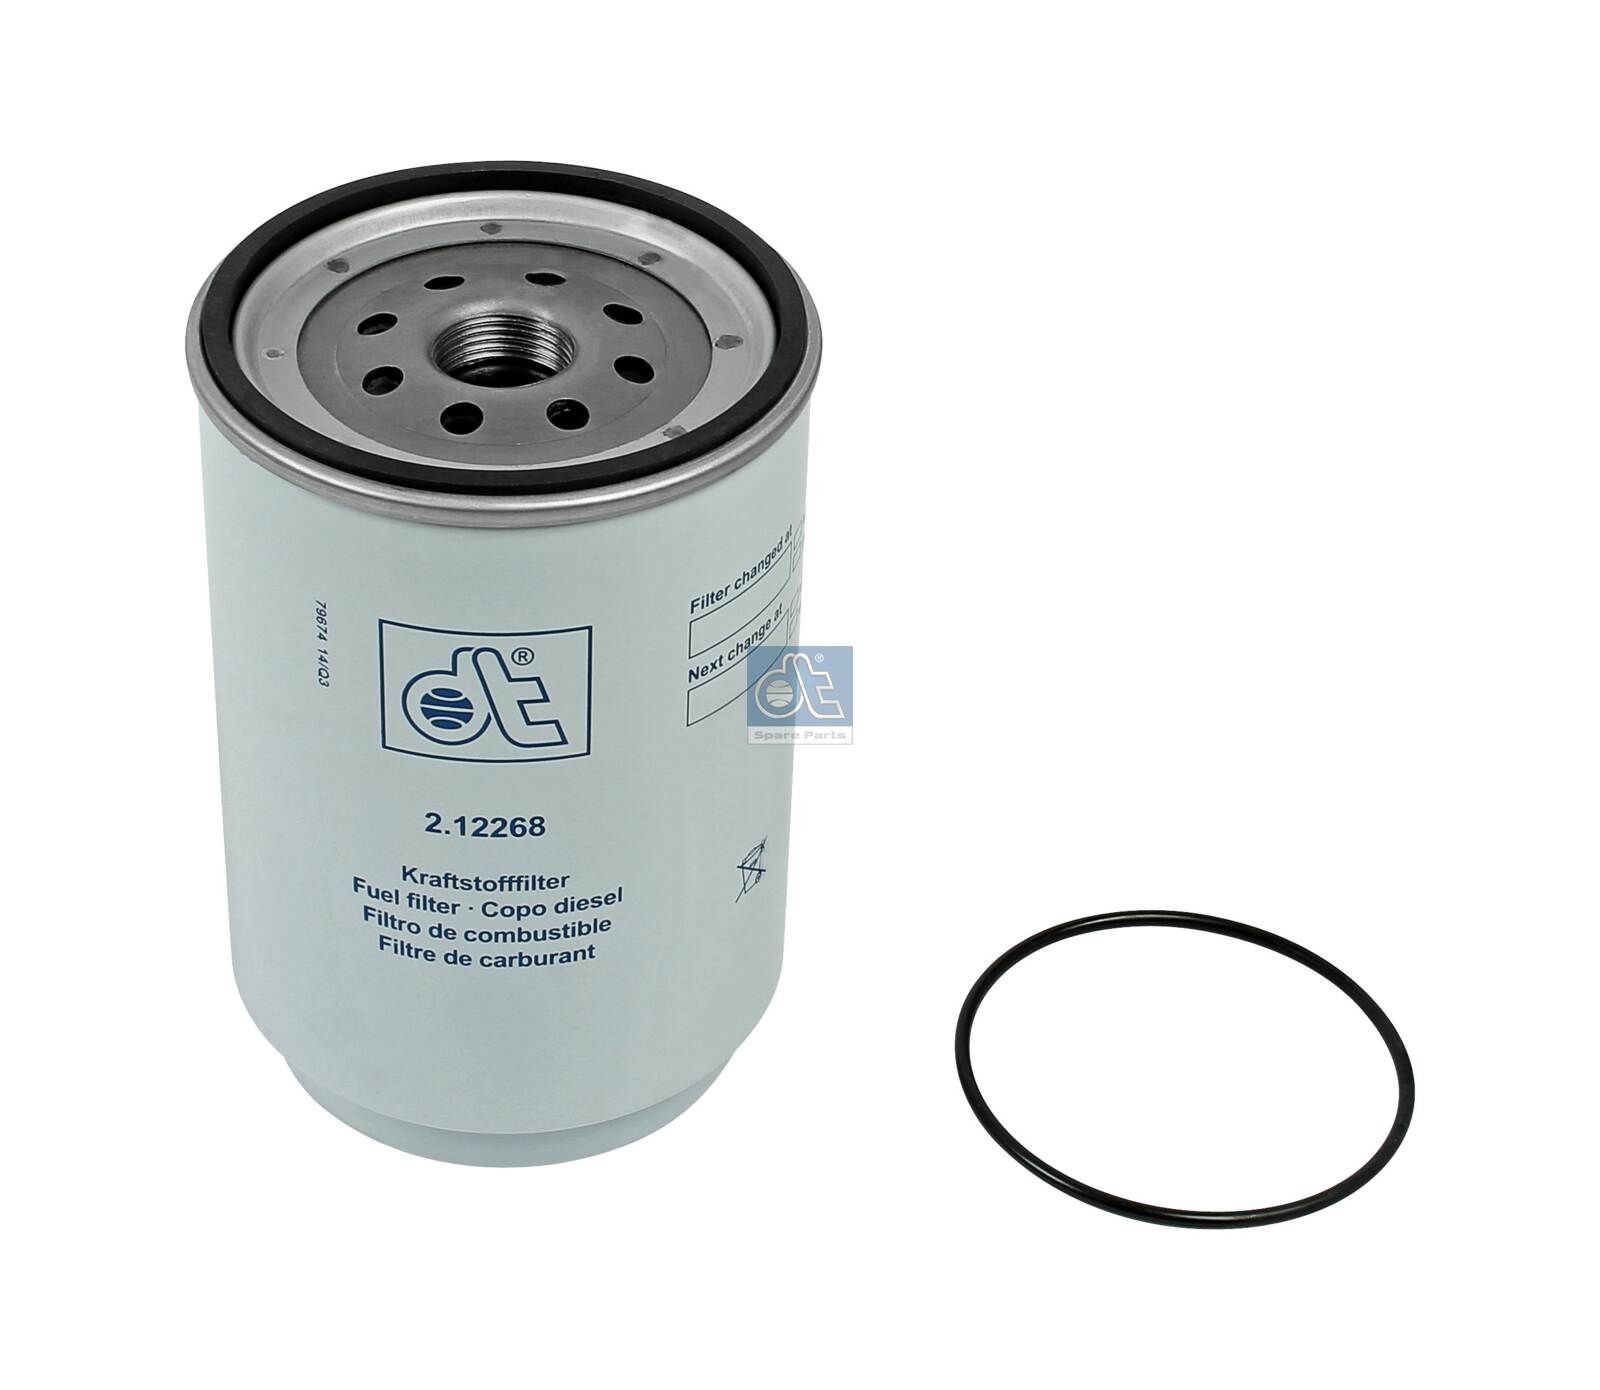 WK 11 001 x DT Spare Parts 2.12268 Fuel filter 21380483